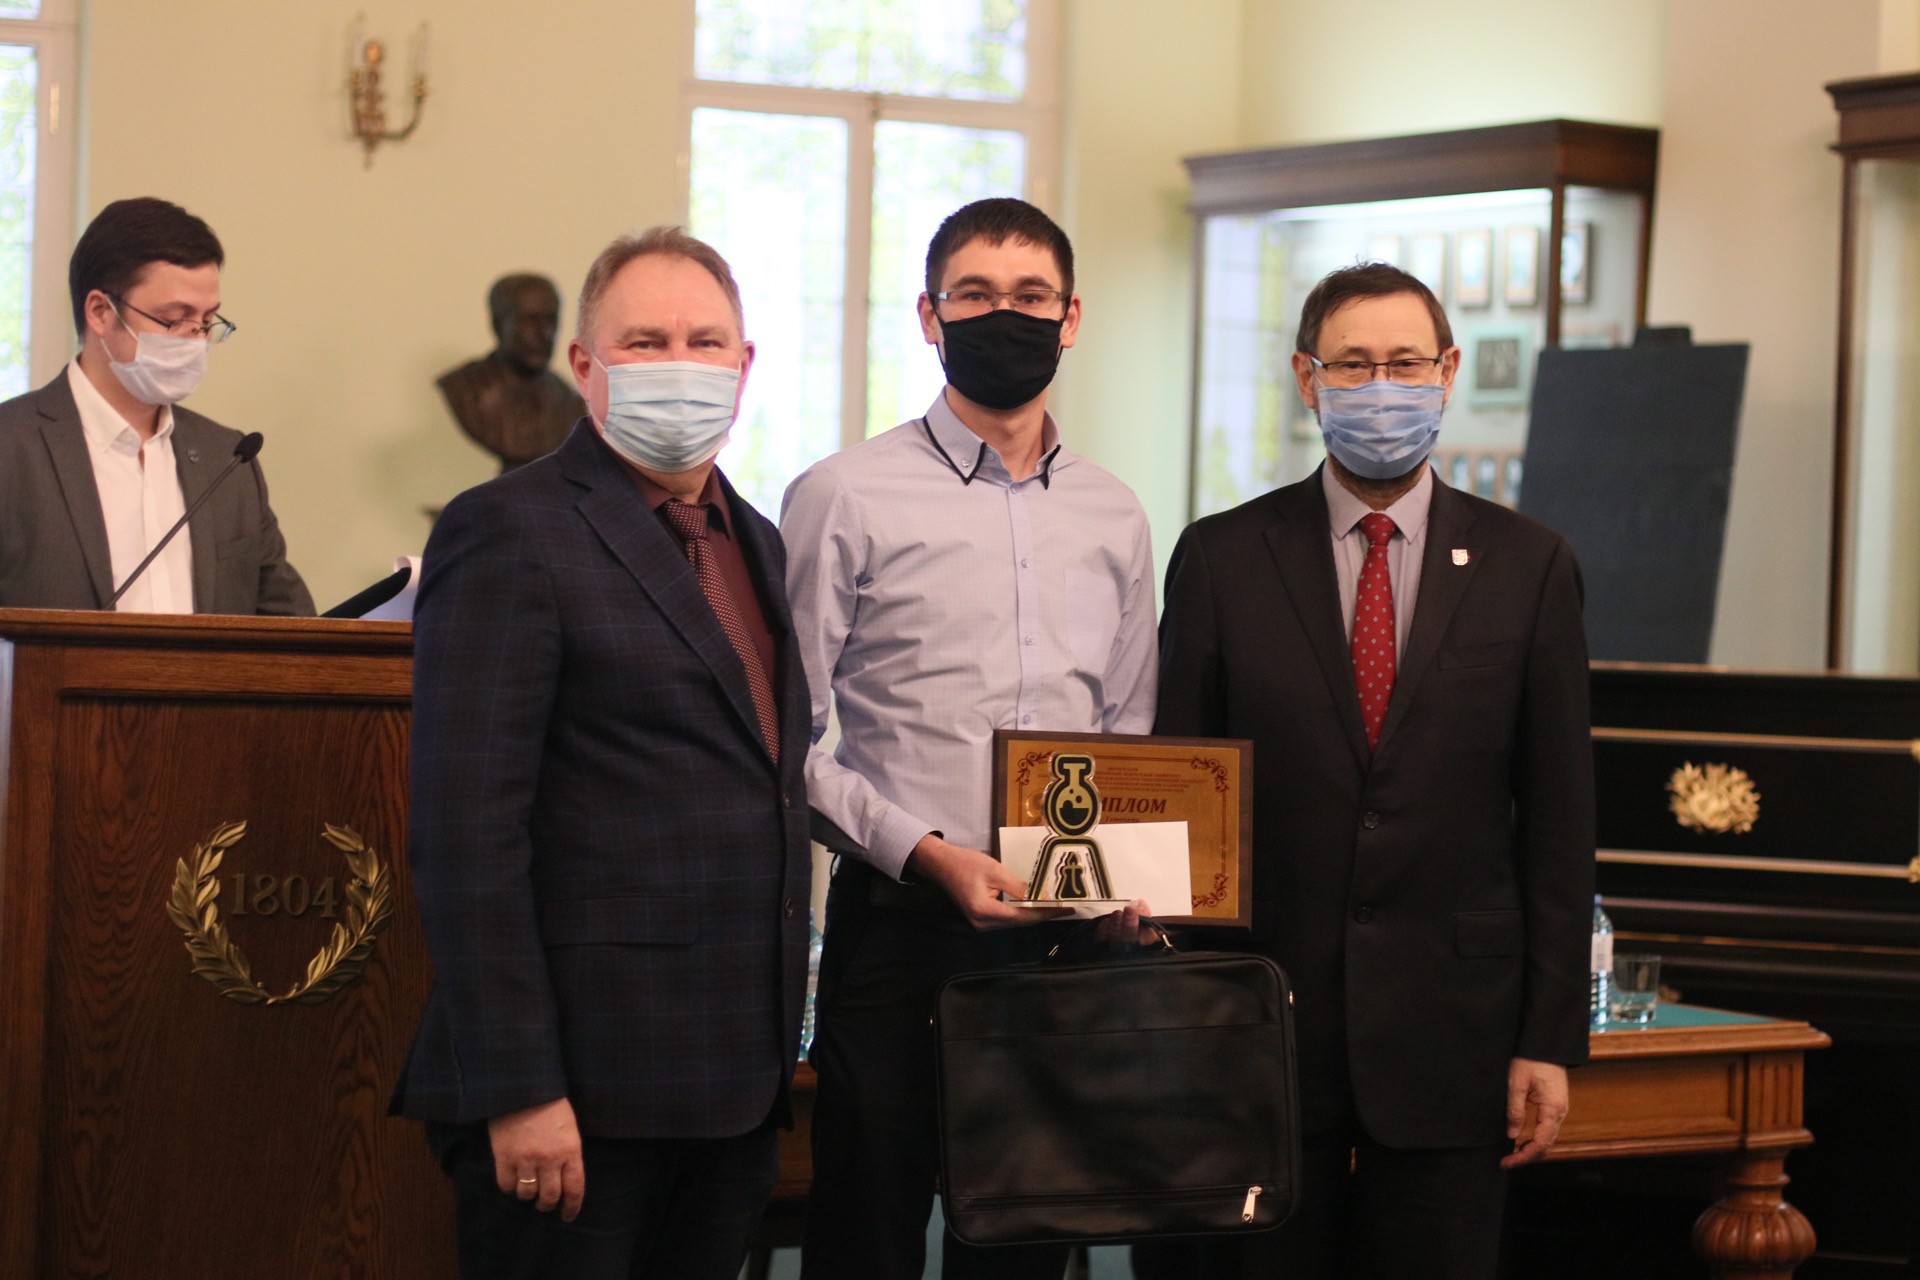 Arbuzov Prize for Young Scientists in Chemistry given to two employees of Kazan Federal University ,IC, Arbuzov Prize